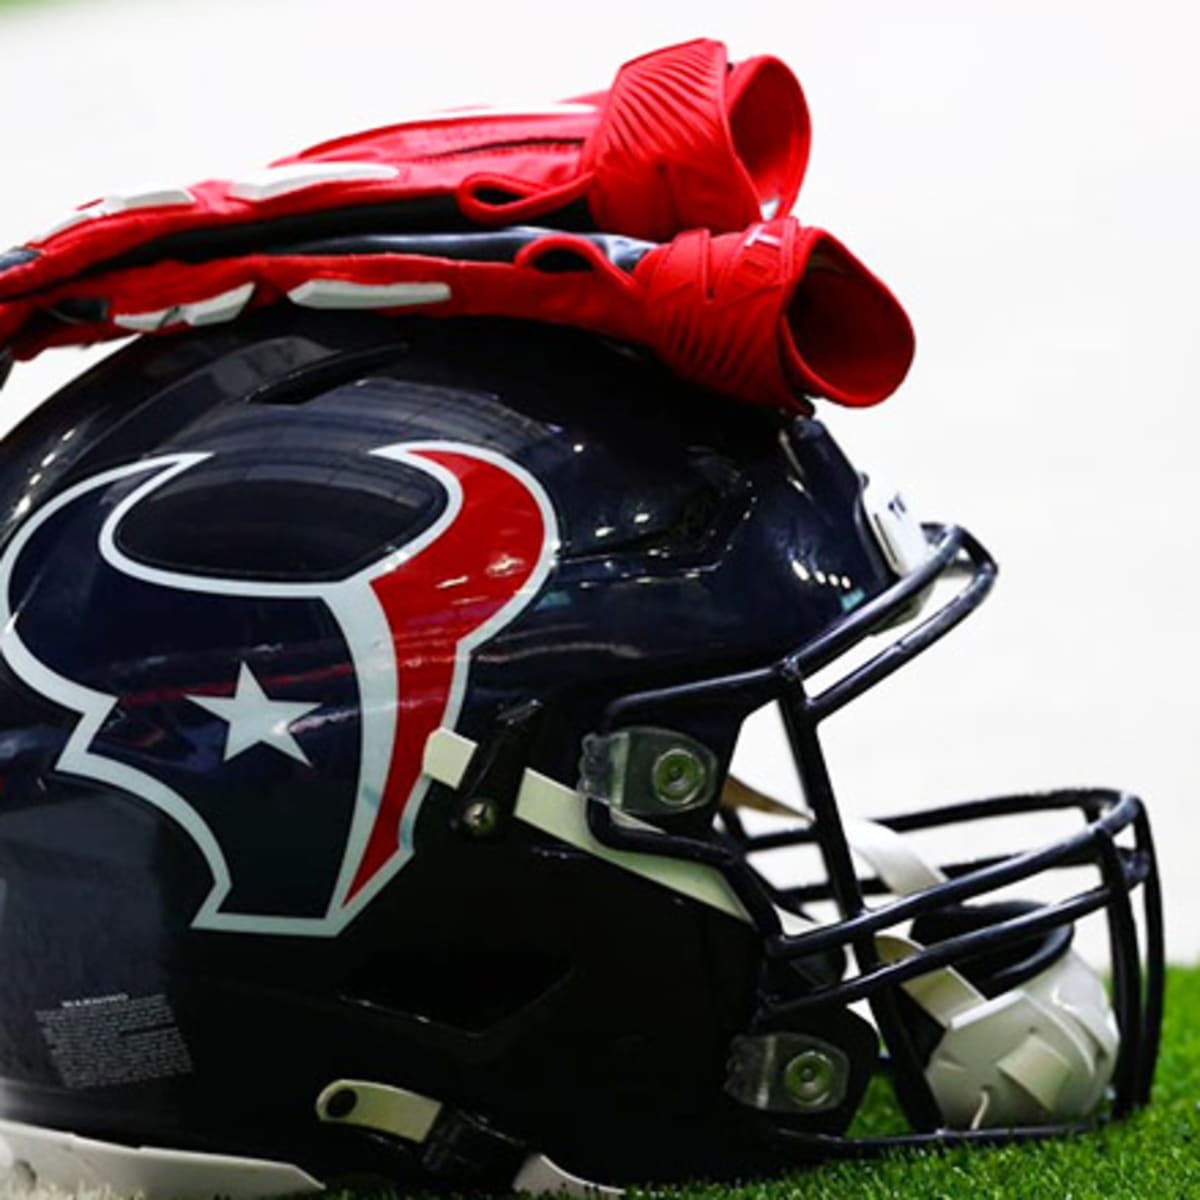 when is the houston texans next game